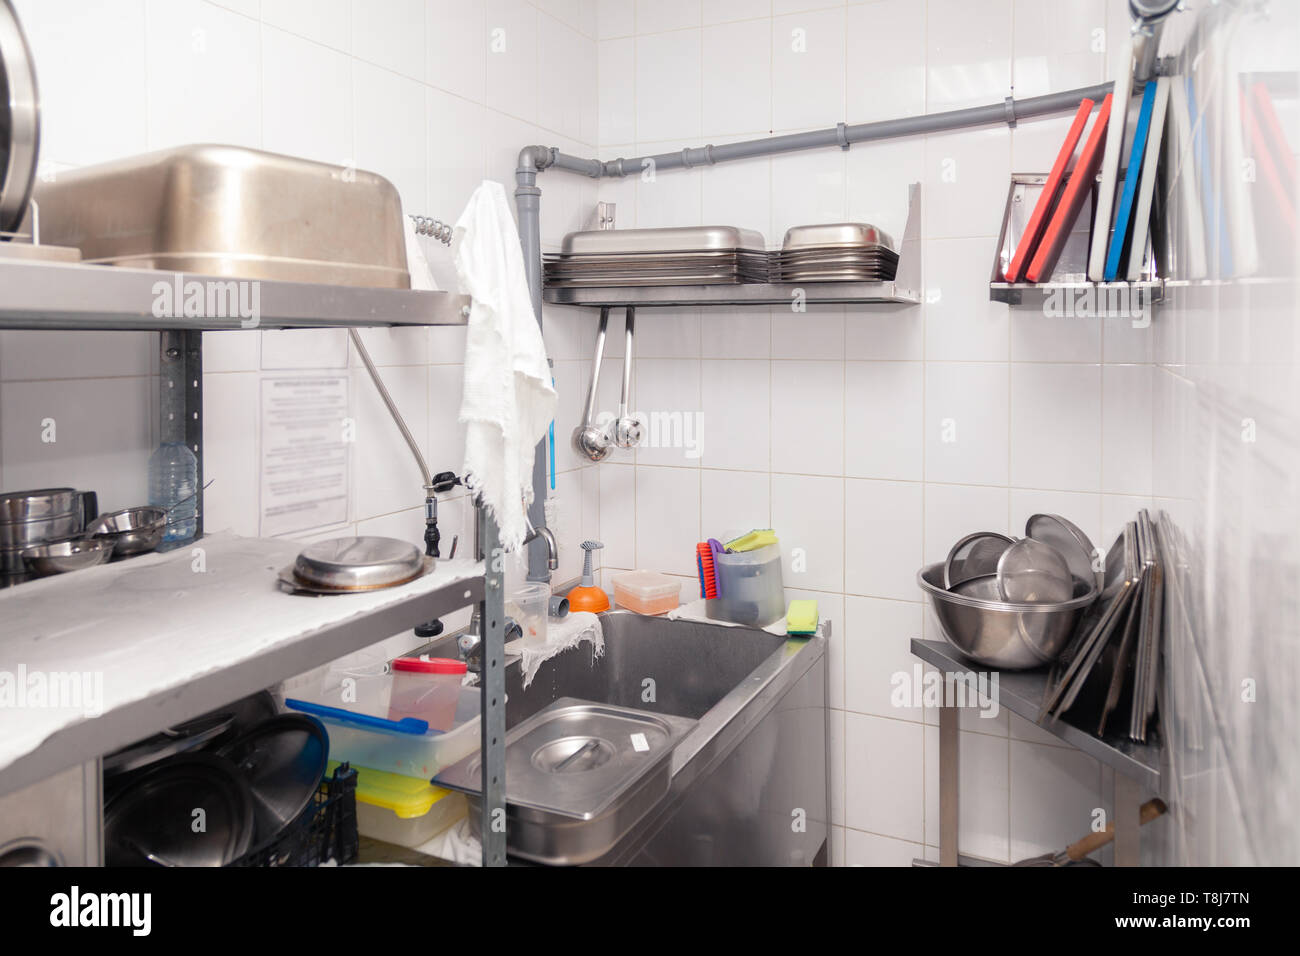 Utensils on metal rack in commercial kitchen Stock Photo - Alamy